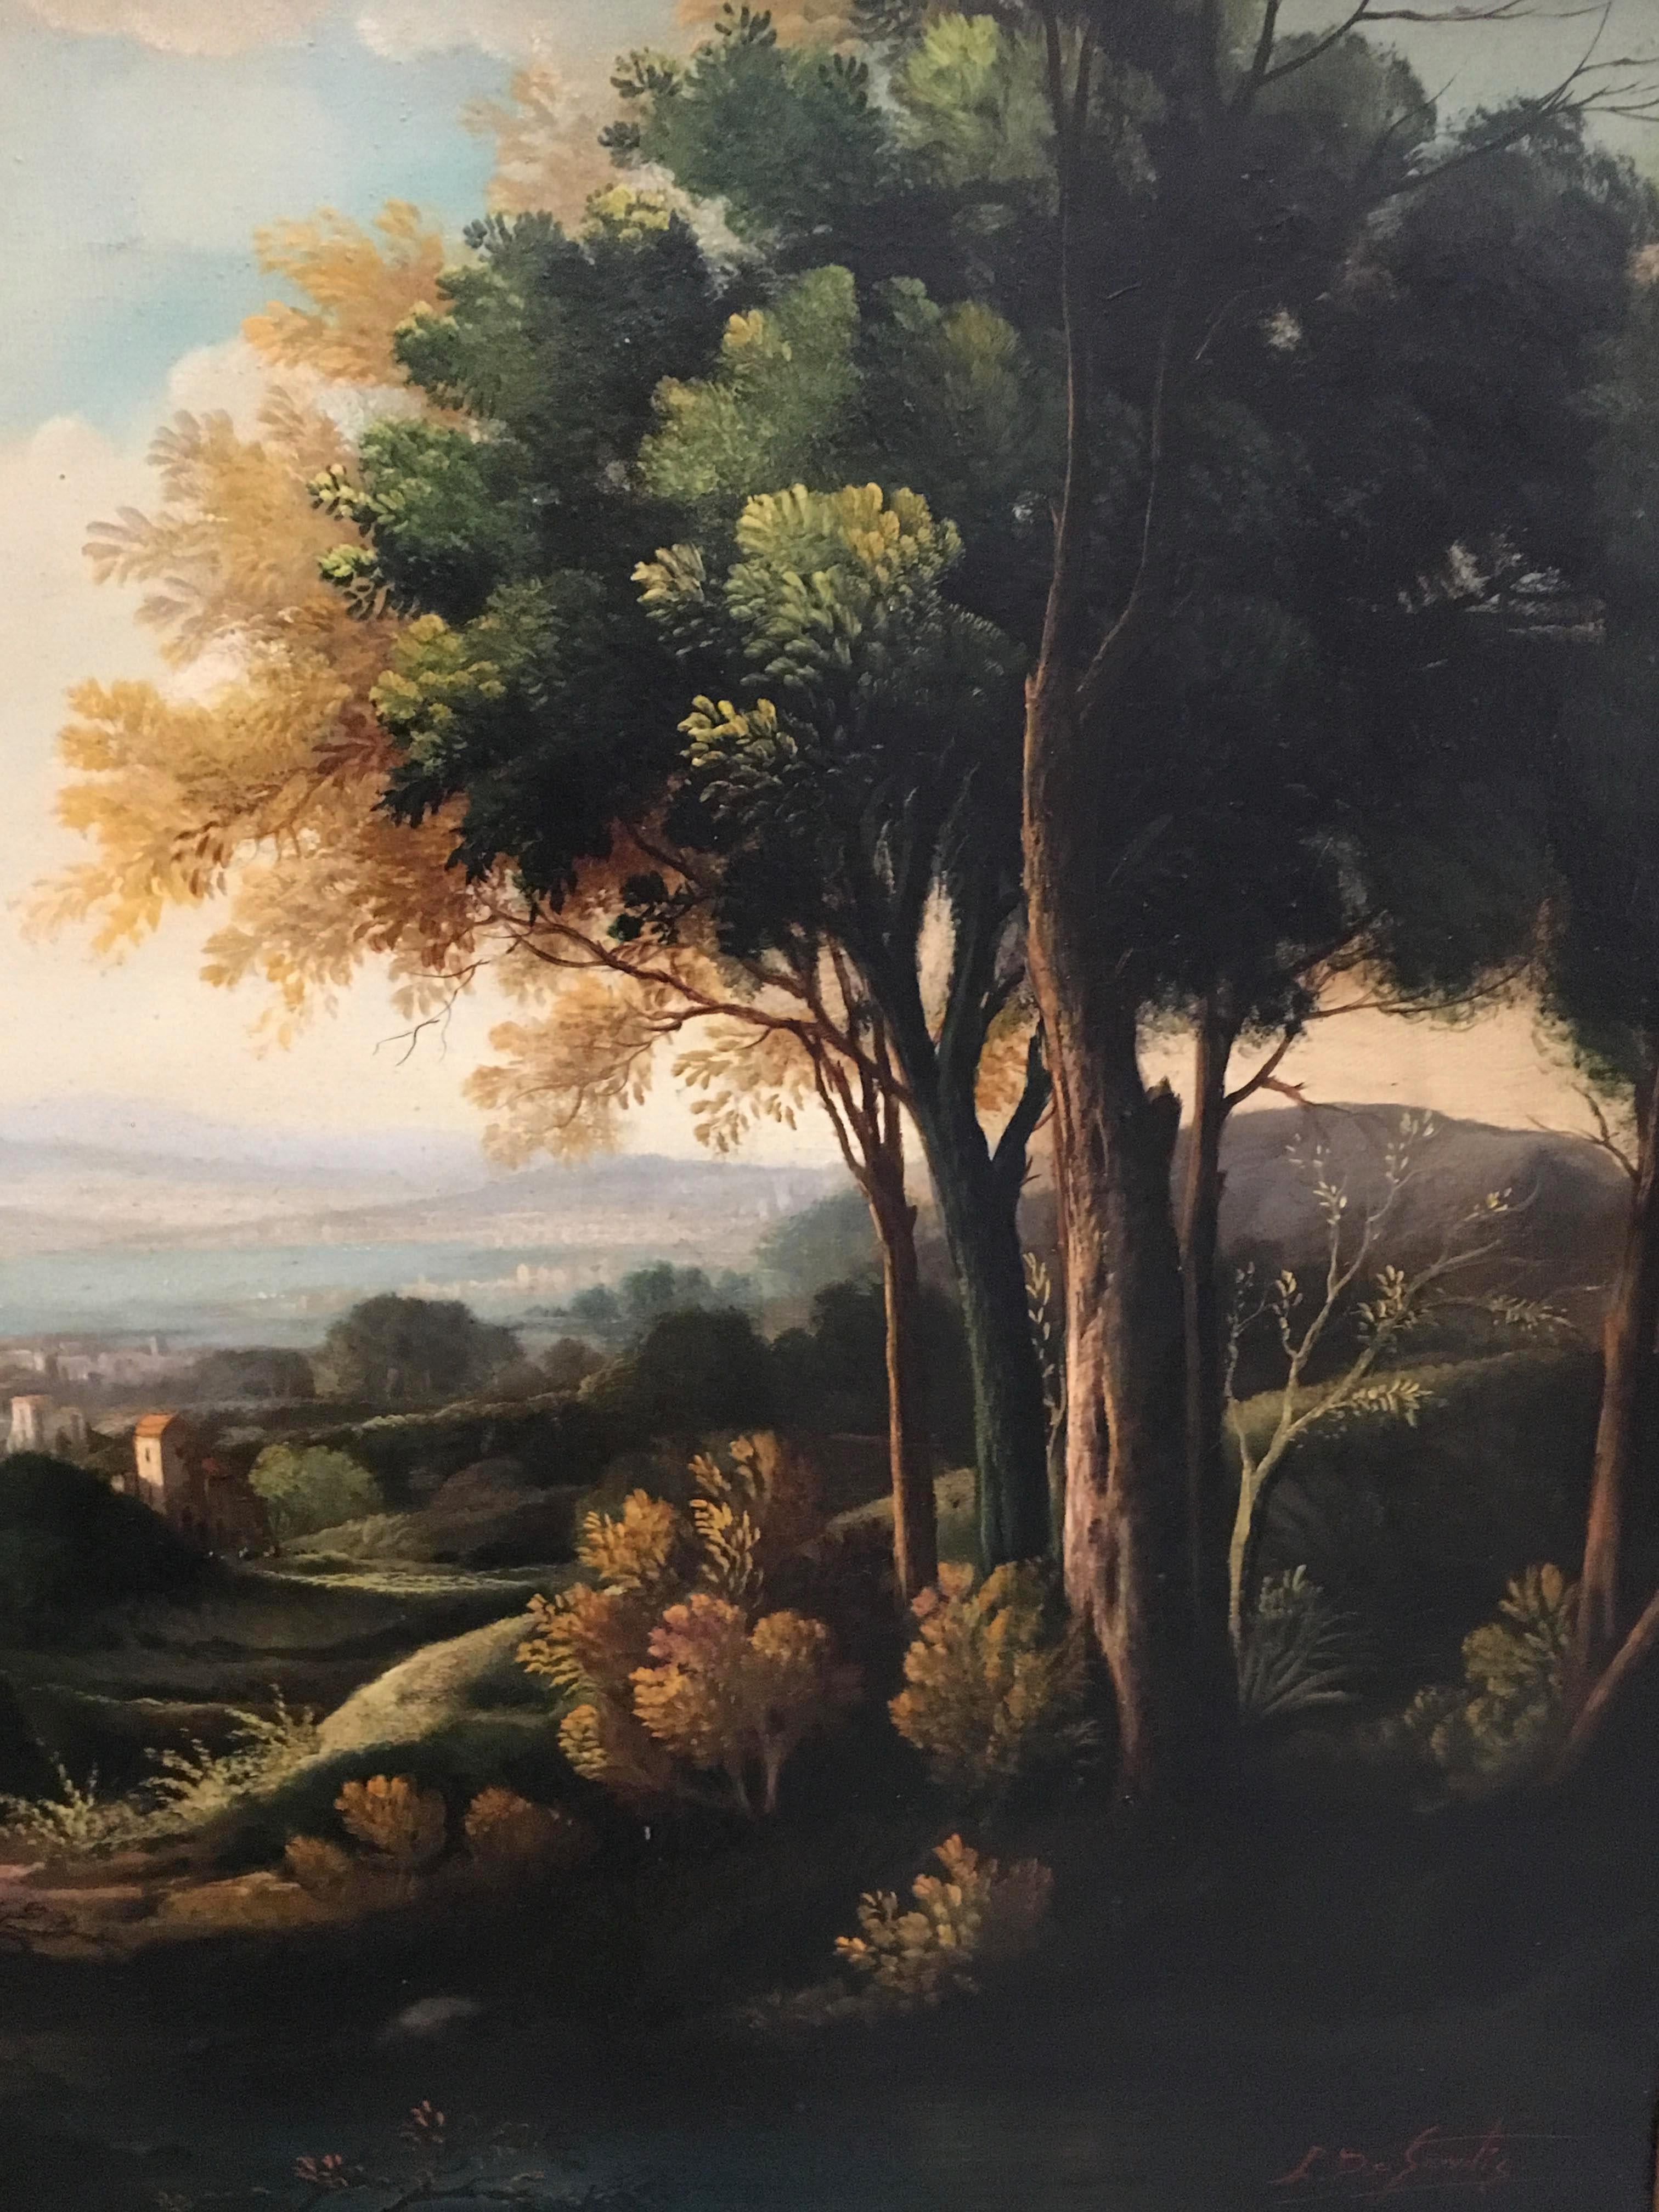 Landscape - Luigi De Santis Italia 2014 - Oil on canvas cm.60x80.
Gold leaf gilded  wooden frame available on request
The painting by L. De Santis is an oil on canvas depicting a landscape with neoclassical characters inspired by Claude Lorrain, a